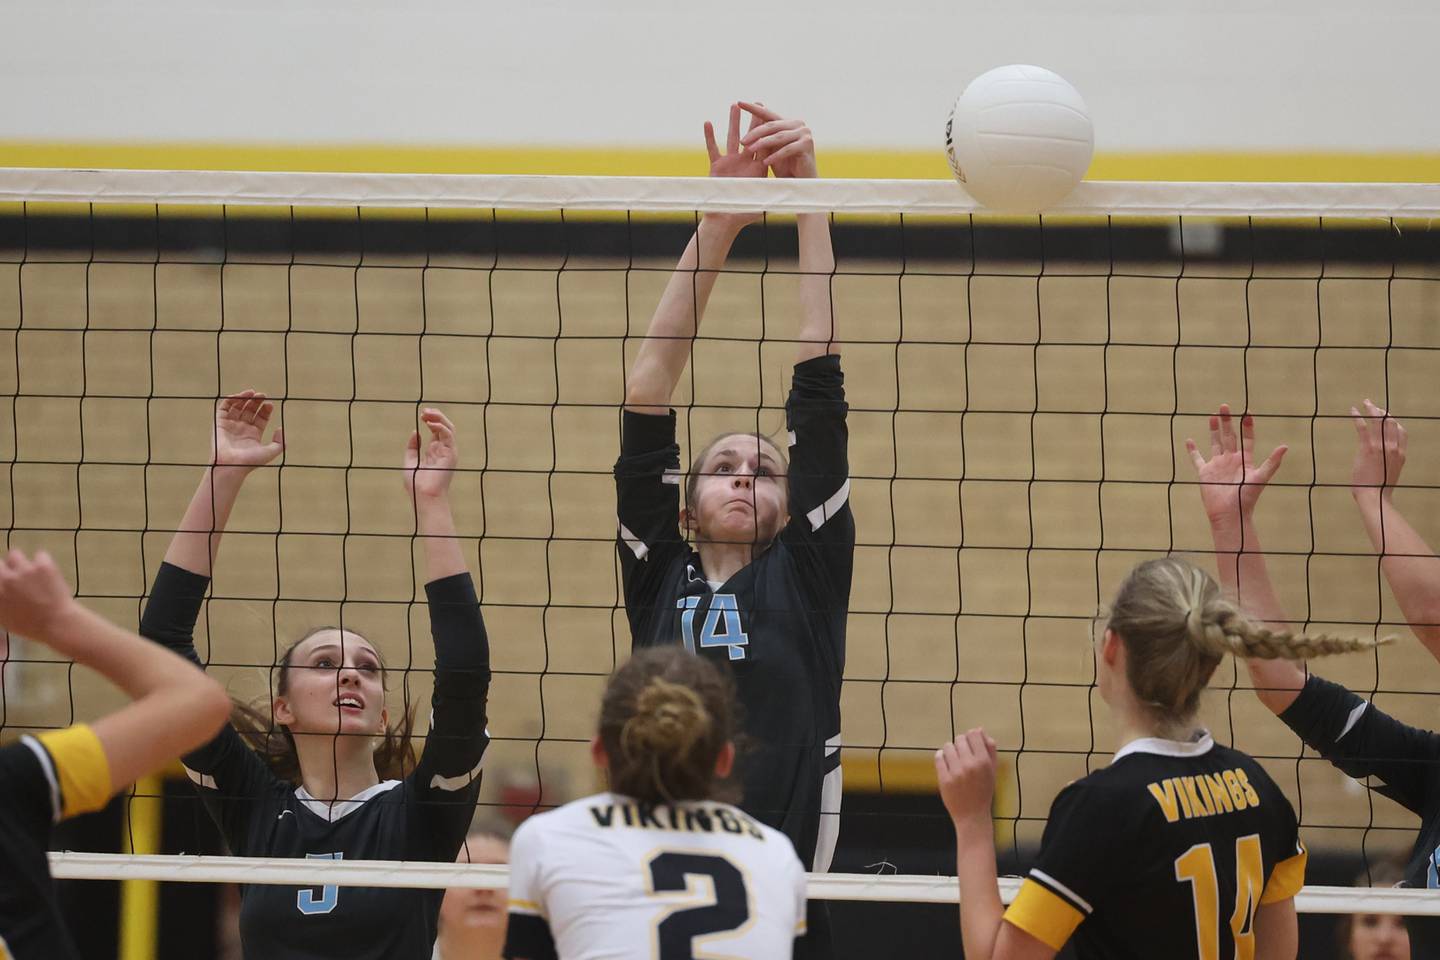 Joliet Catholic’s Emma Vitas blocks a shot for a point against St. Laurence in the Class 3A Hinsdale South Super-sectional on Friday